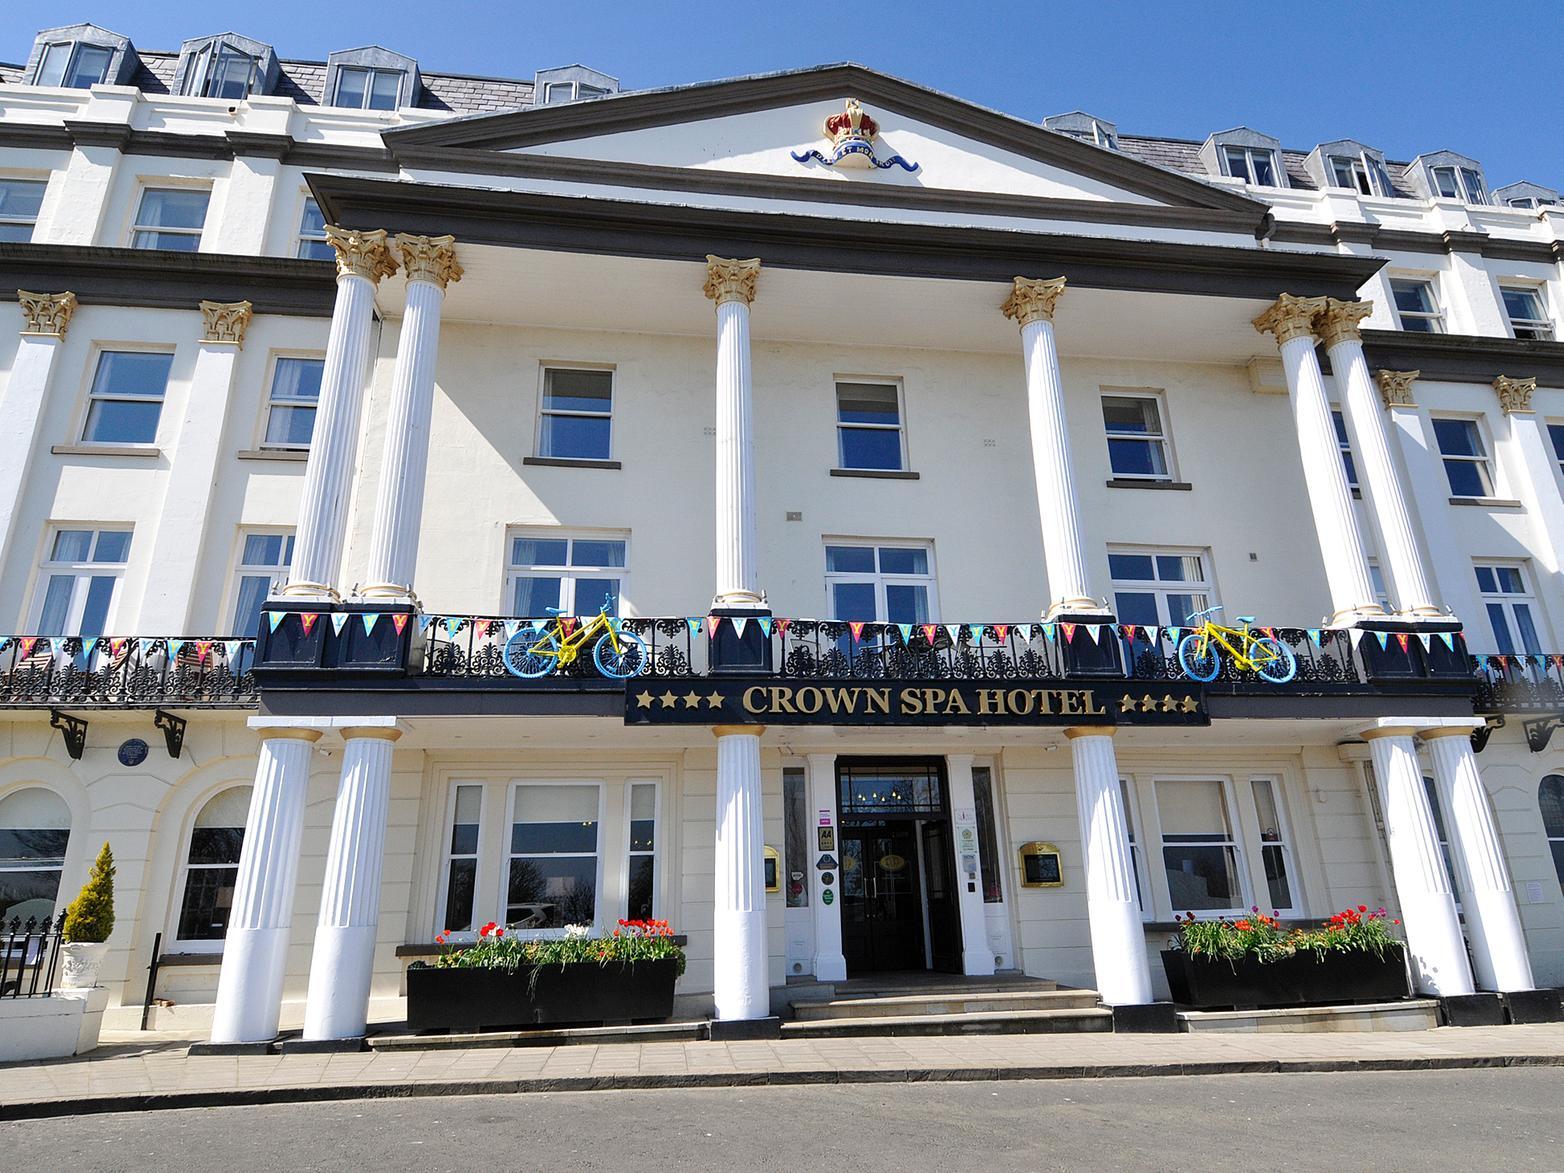 The Crown Spa Hotel is Scarborough's first hotel built in 1845. The interior of the Crown still contains many of the original architectural features.